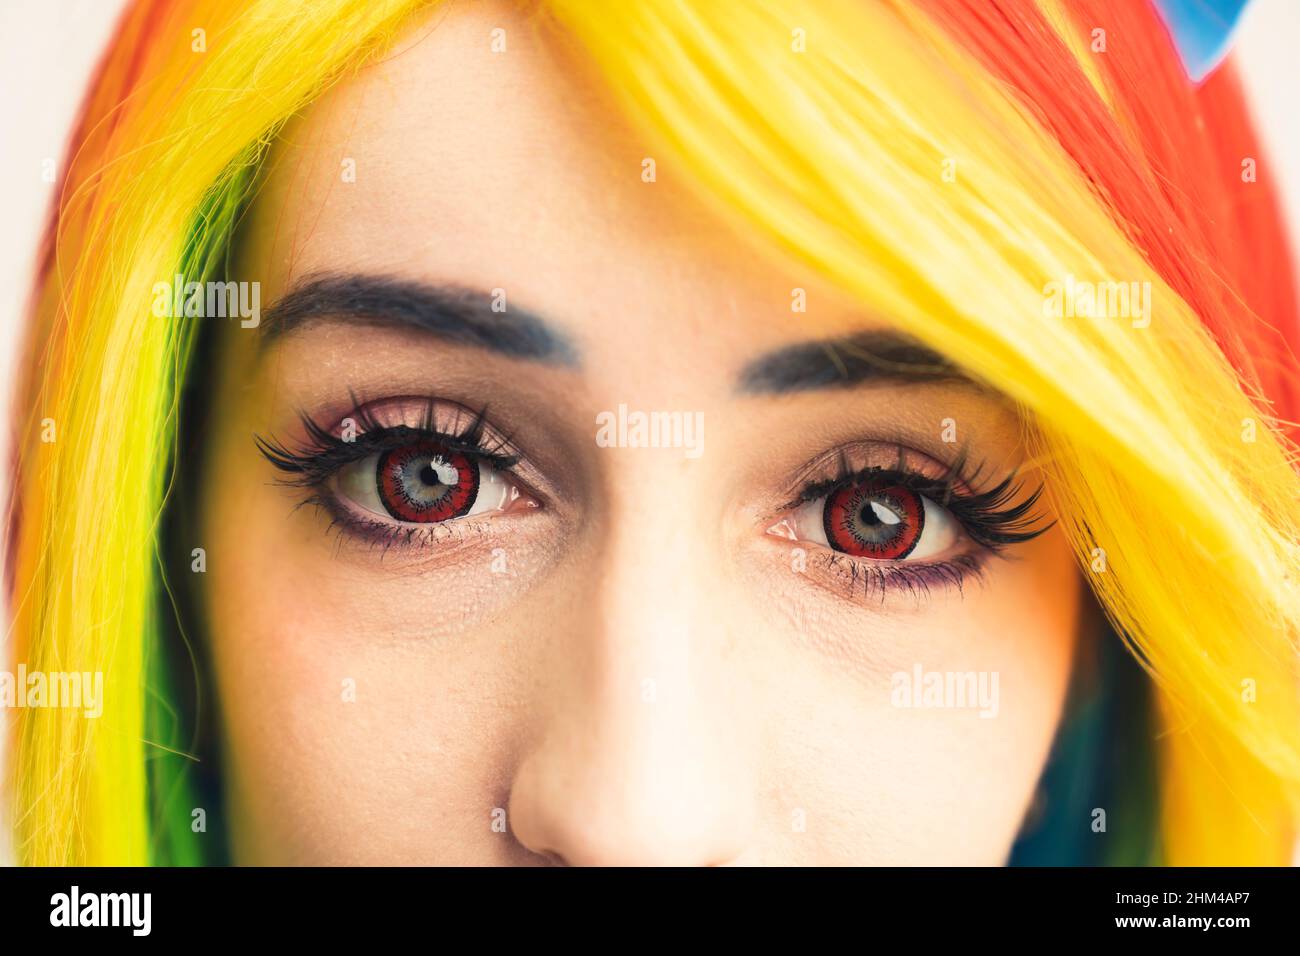 Rainbow-haired girl with red eyes and long dark lashes looking into the camera extreme close-up shot. High quality photo Stock Photo